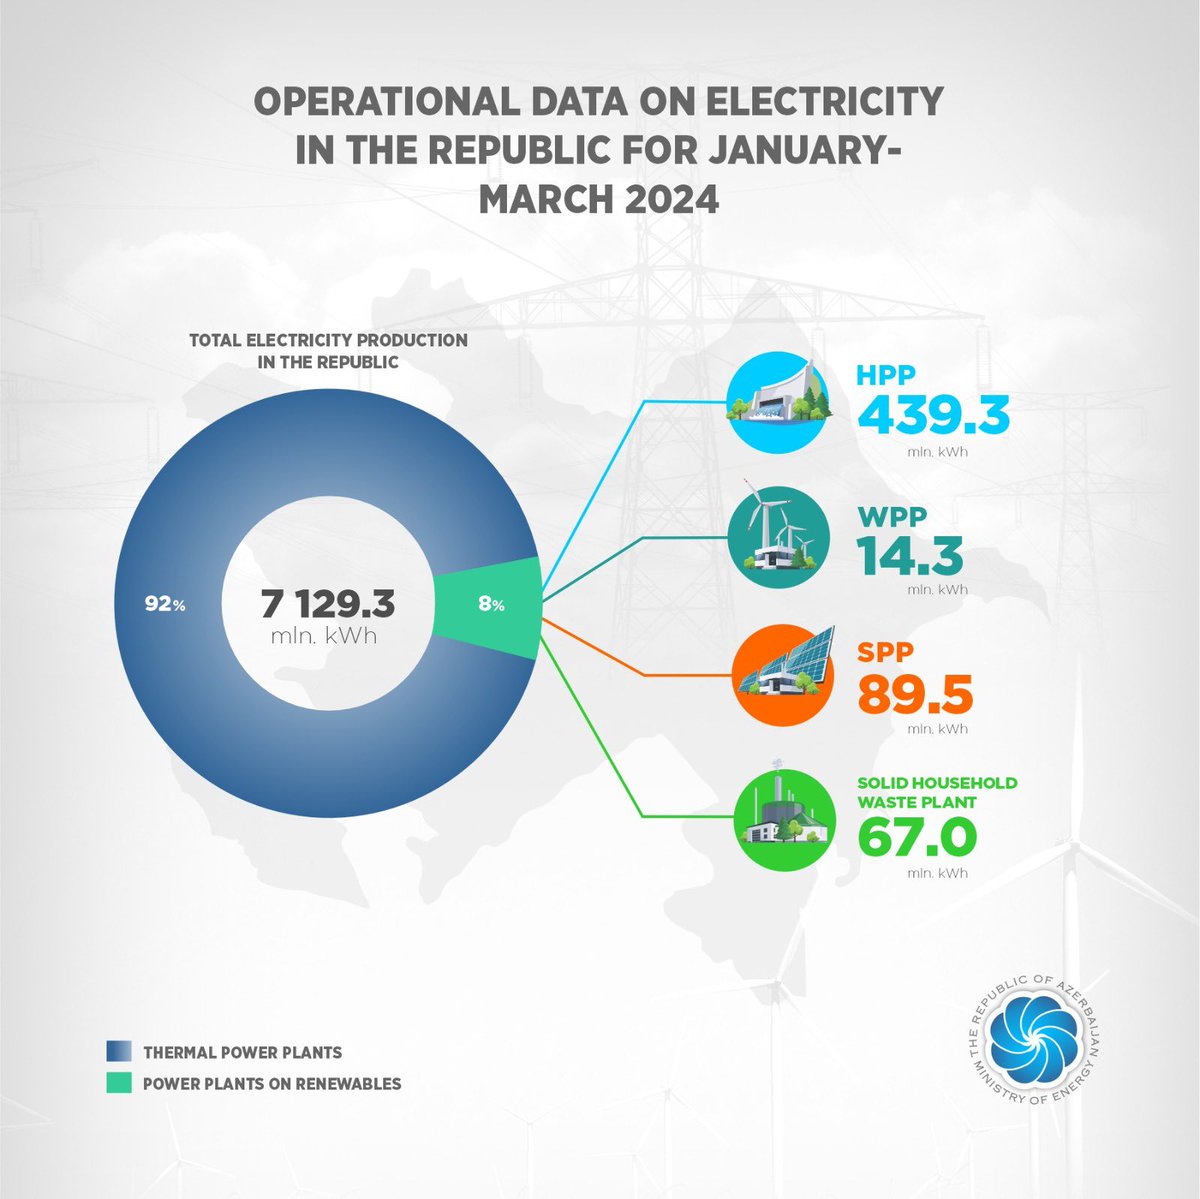 In January-March, #electricity production from TPPs amounted to 6519.2 million kWh, and from renewable sources, including hydropower 610.1 million kWh with an increase of 241.5 million kWh.